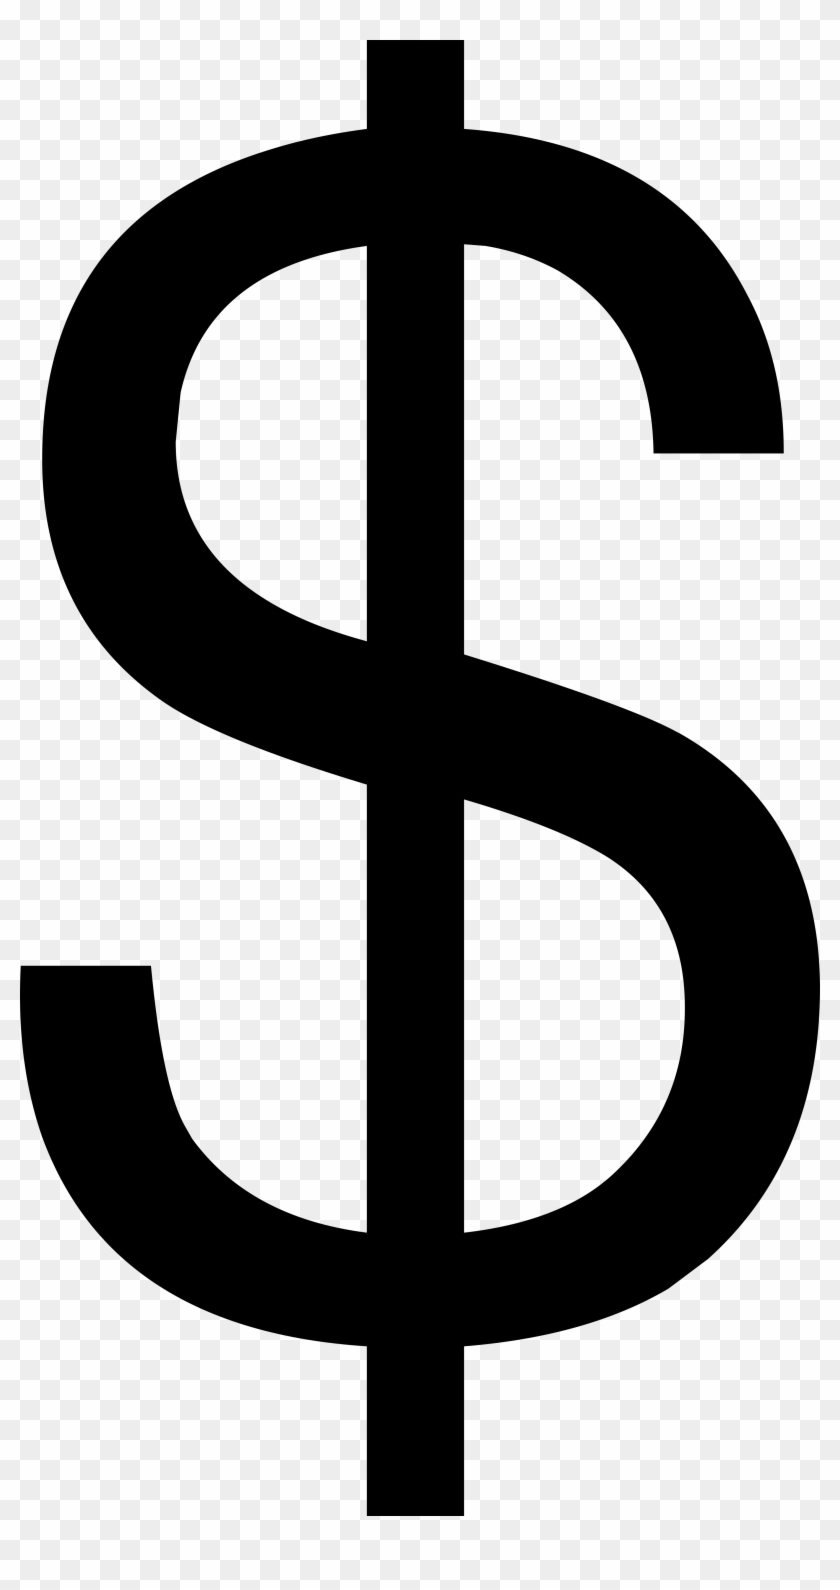 Dollar - Us Dollar Sign Png Clipart #207219